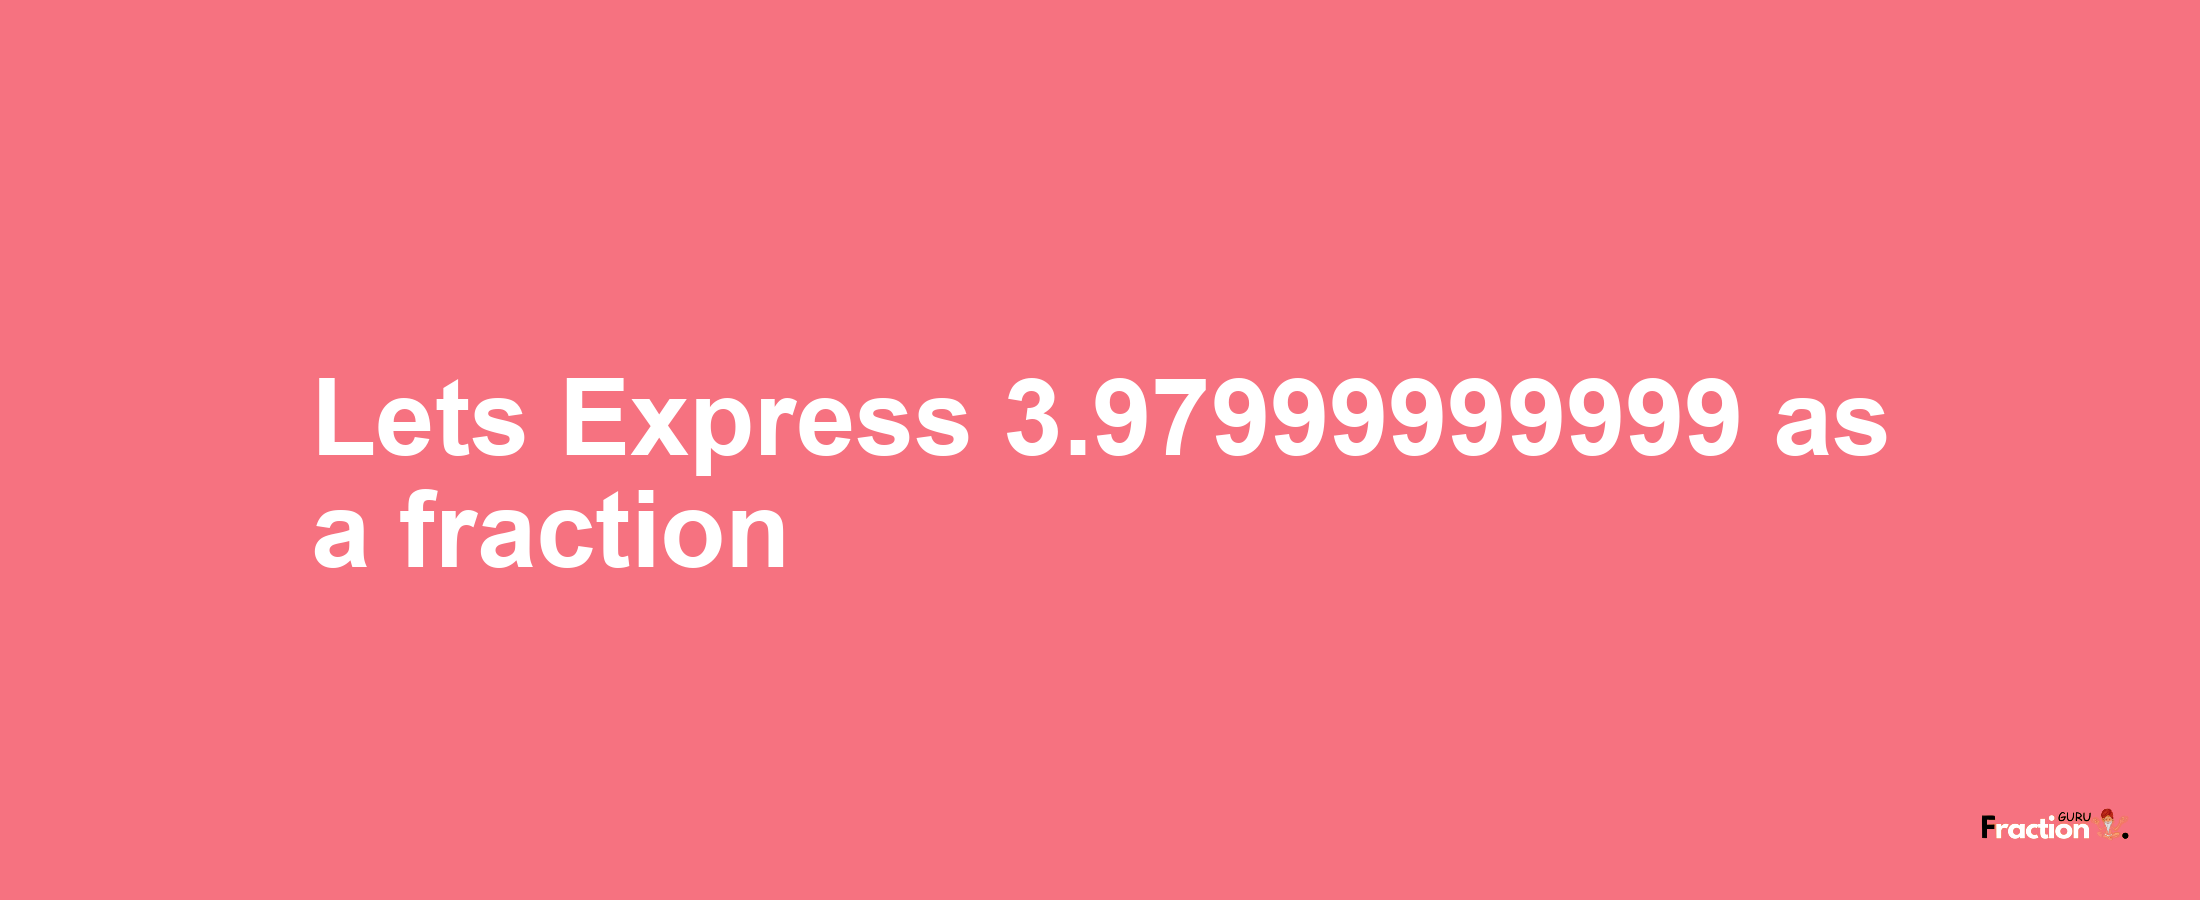 Lets Express 3.97999999999 as afraction